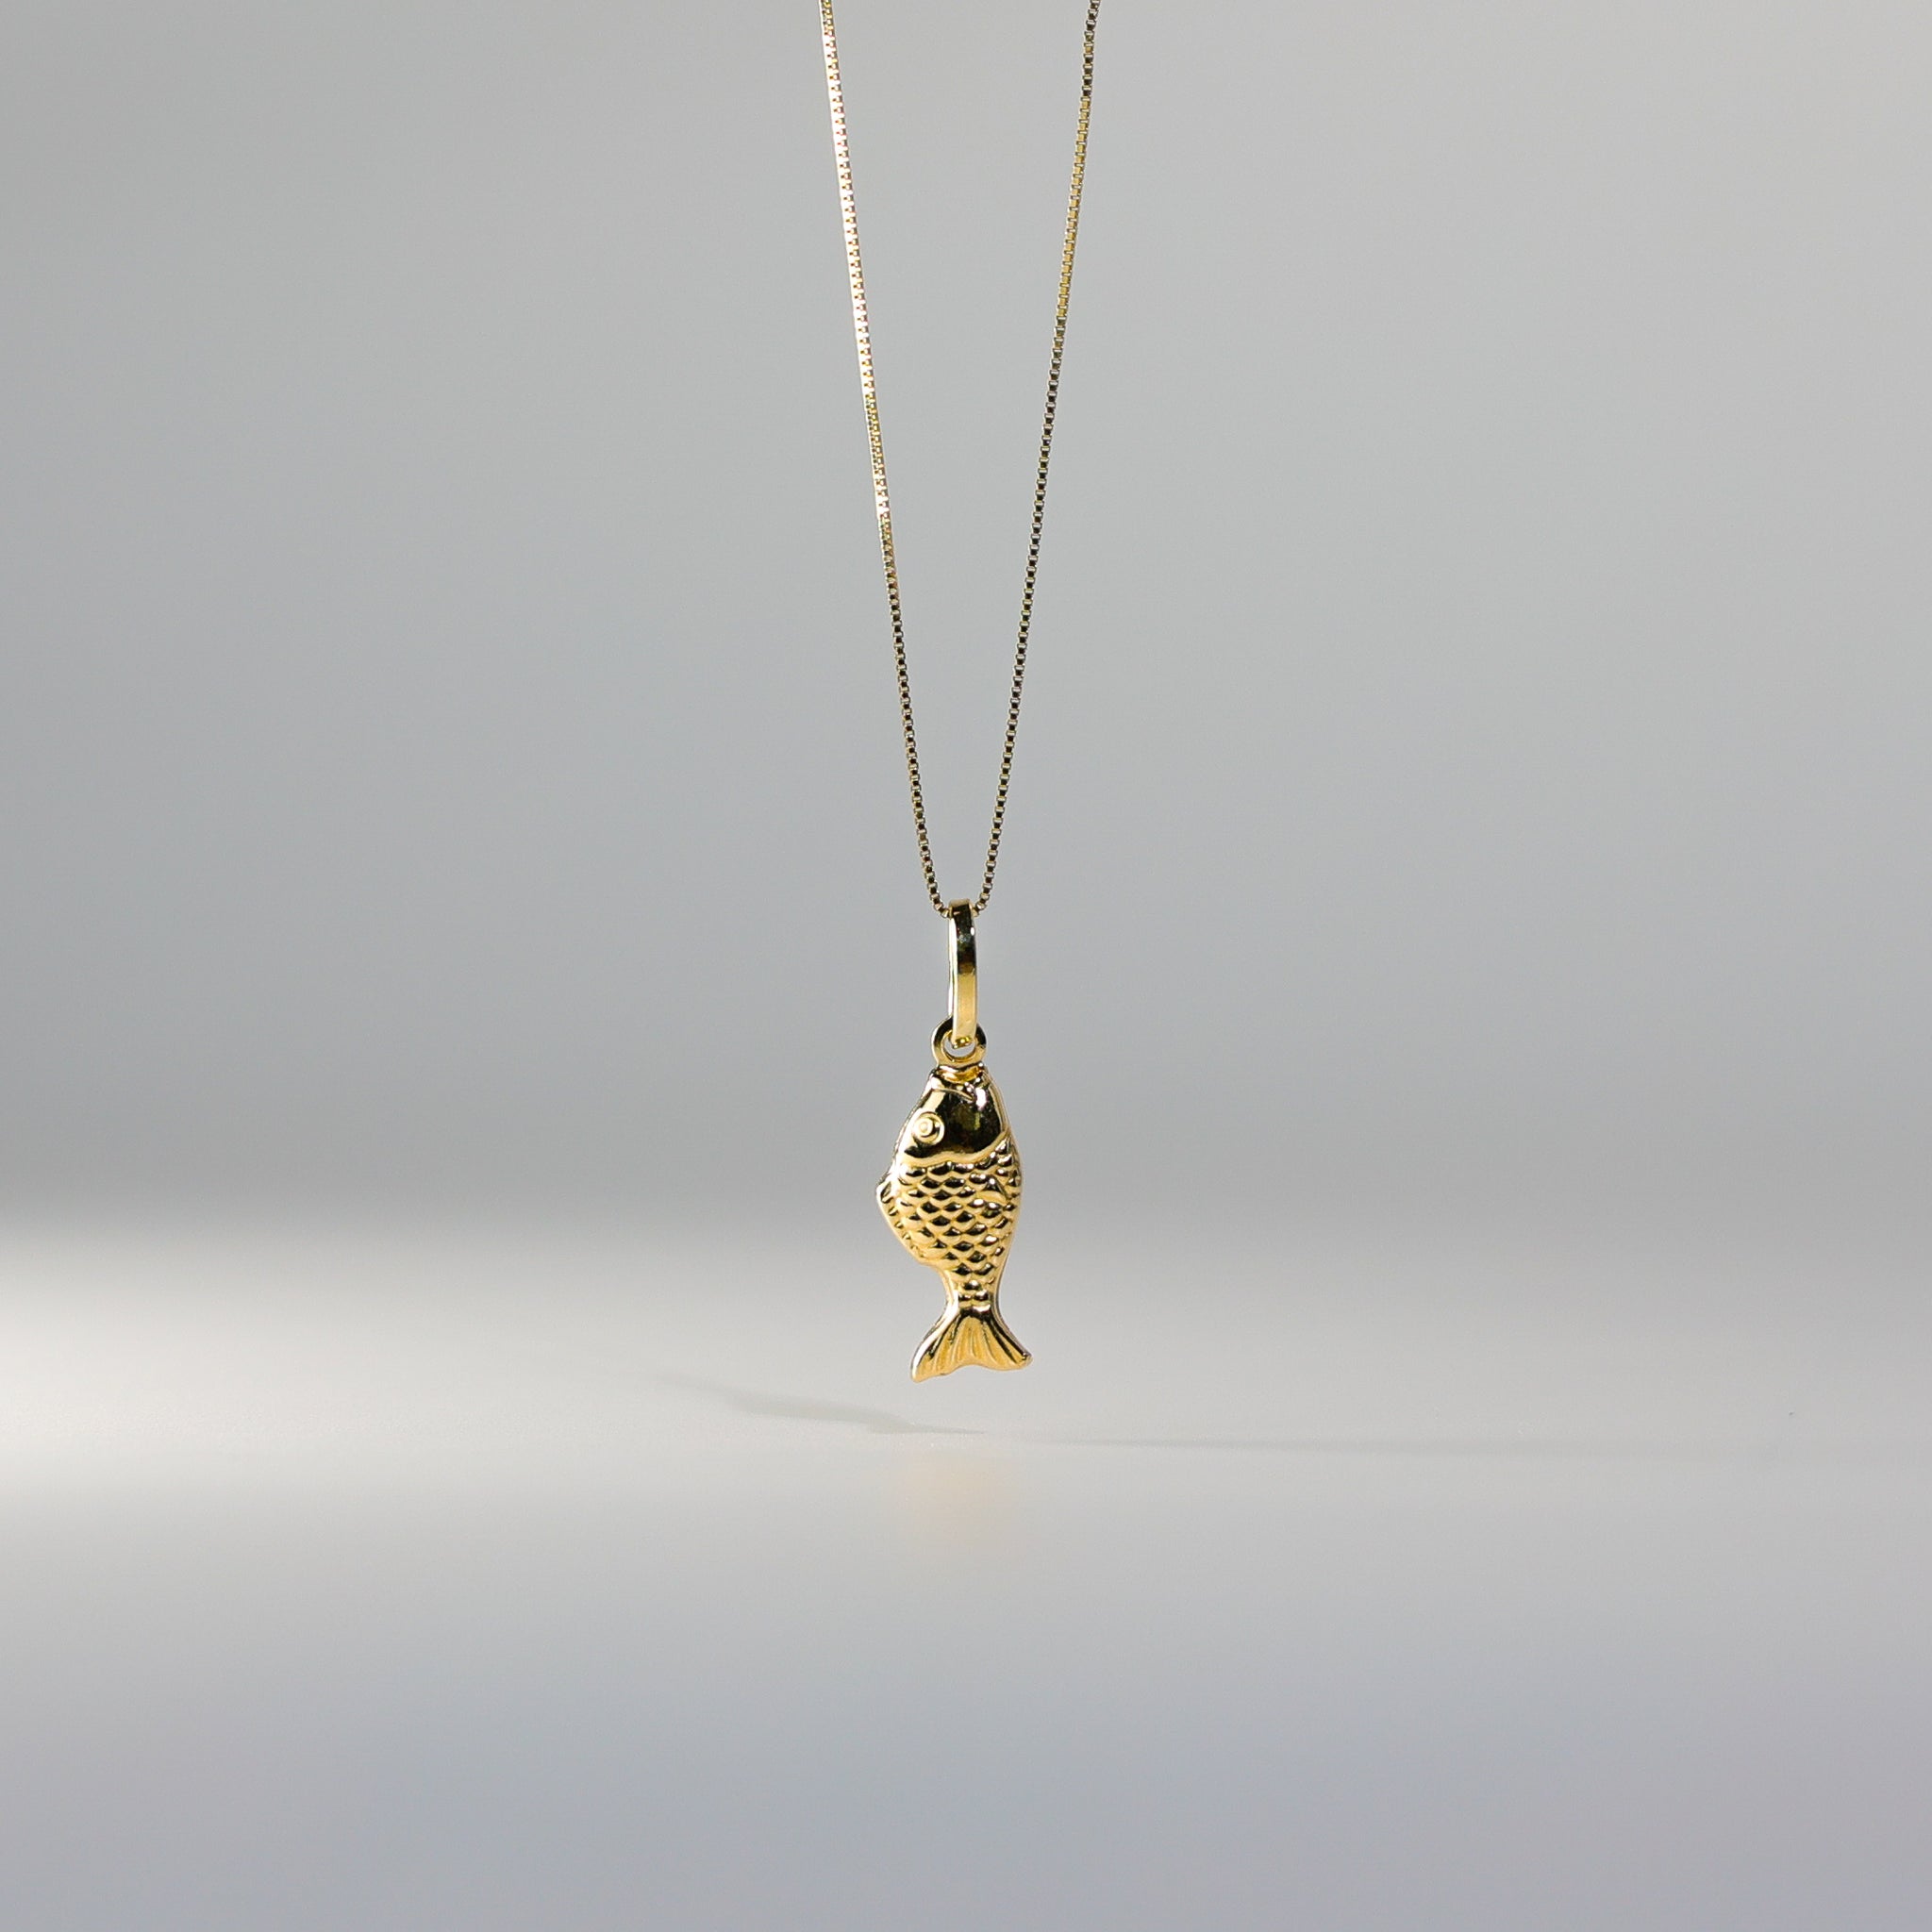 Brooke Gregson | 18k Gold Diamond Fish Necklace at Voiage Jewelry